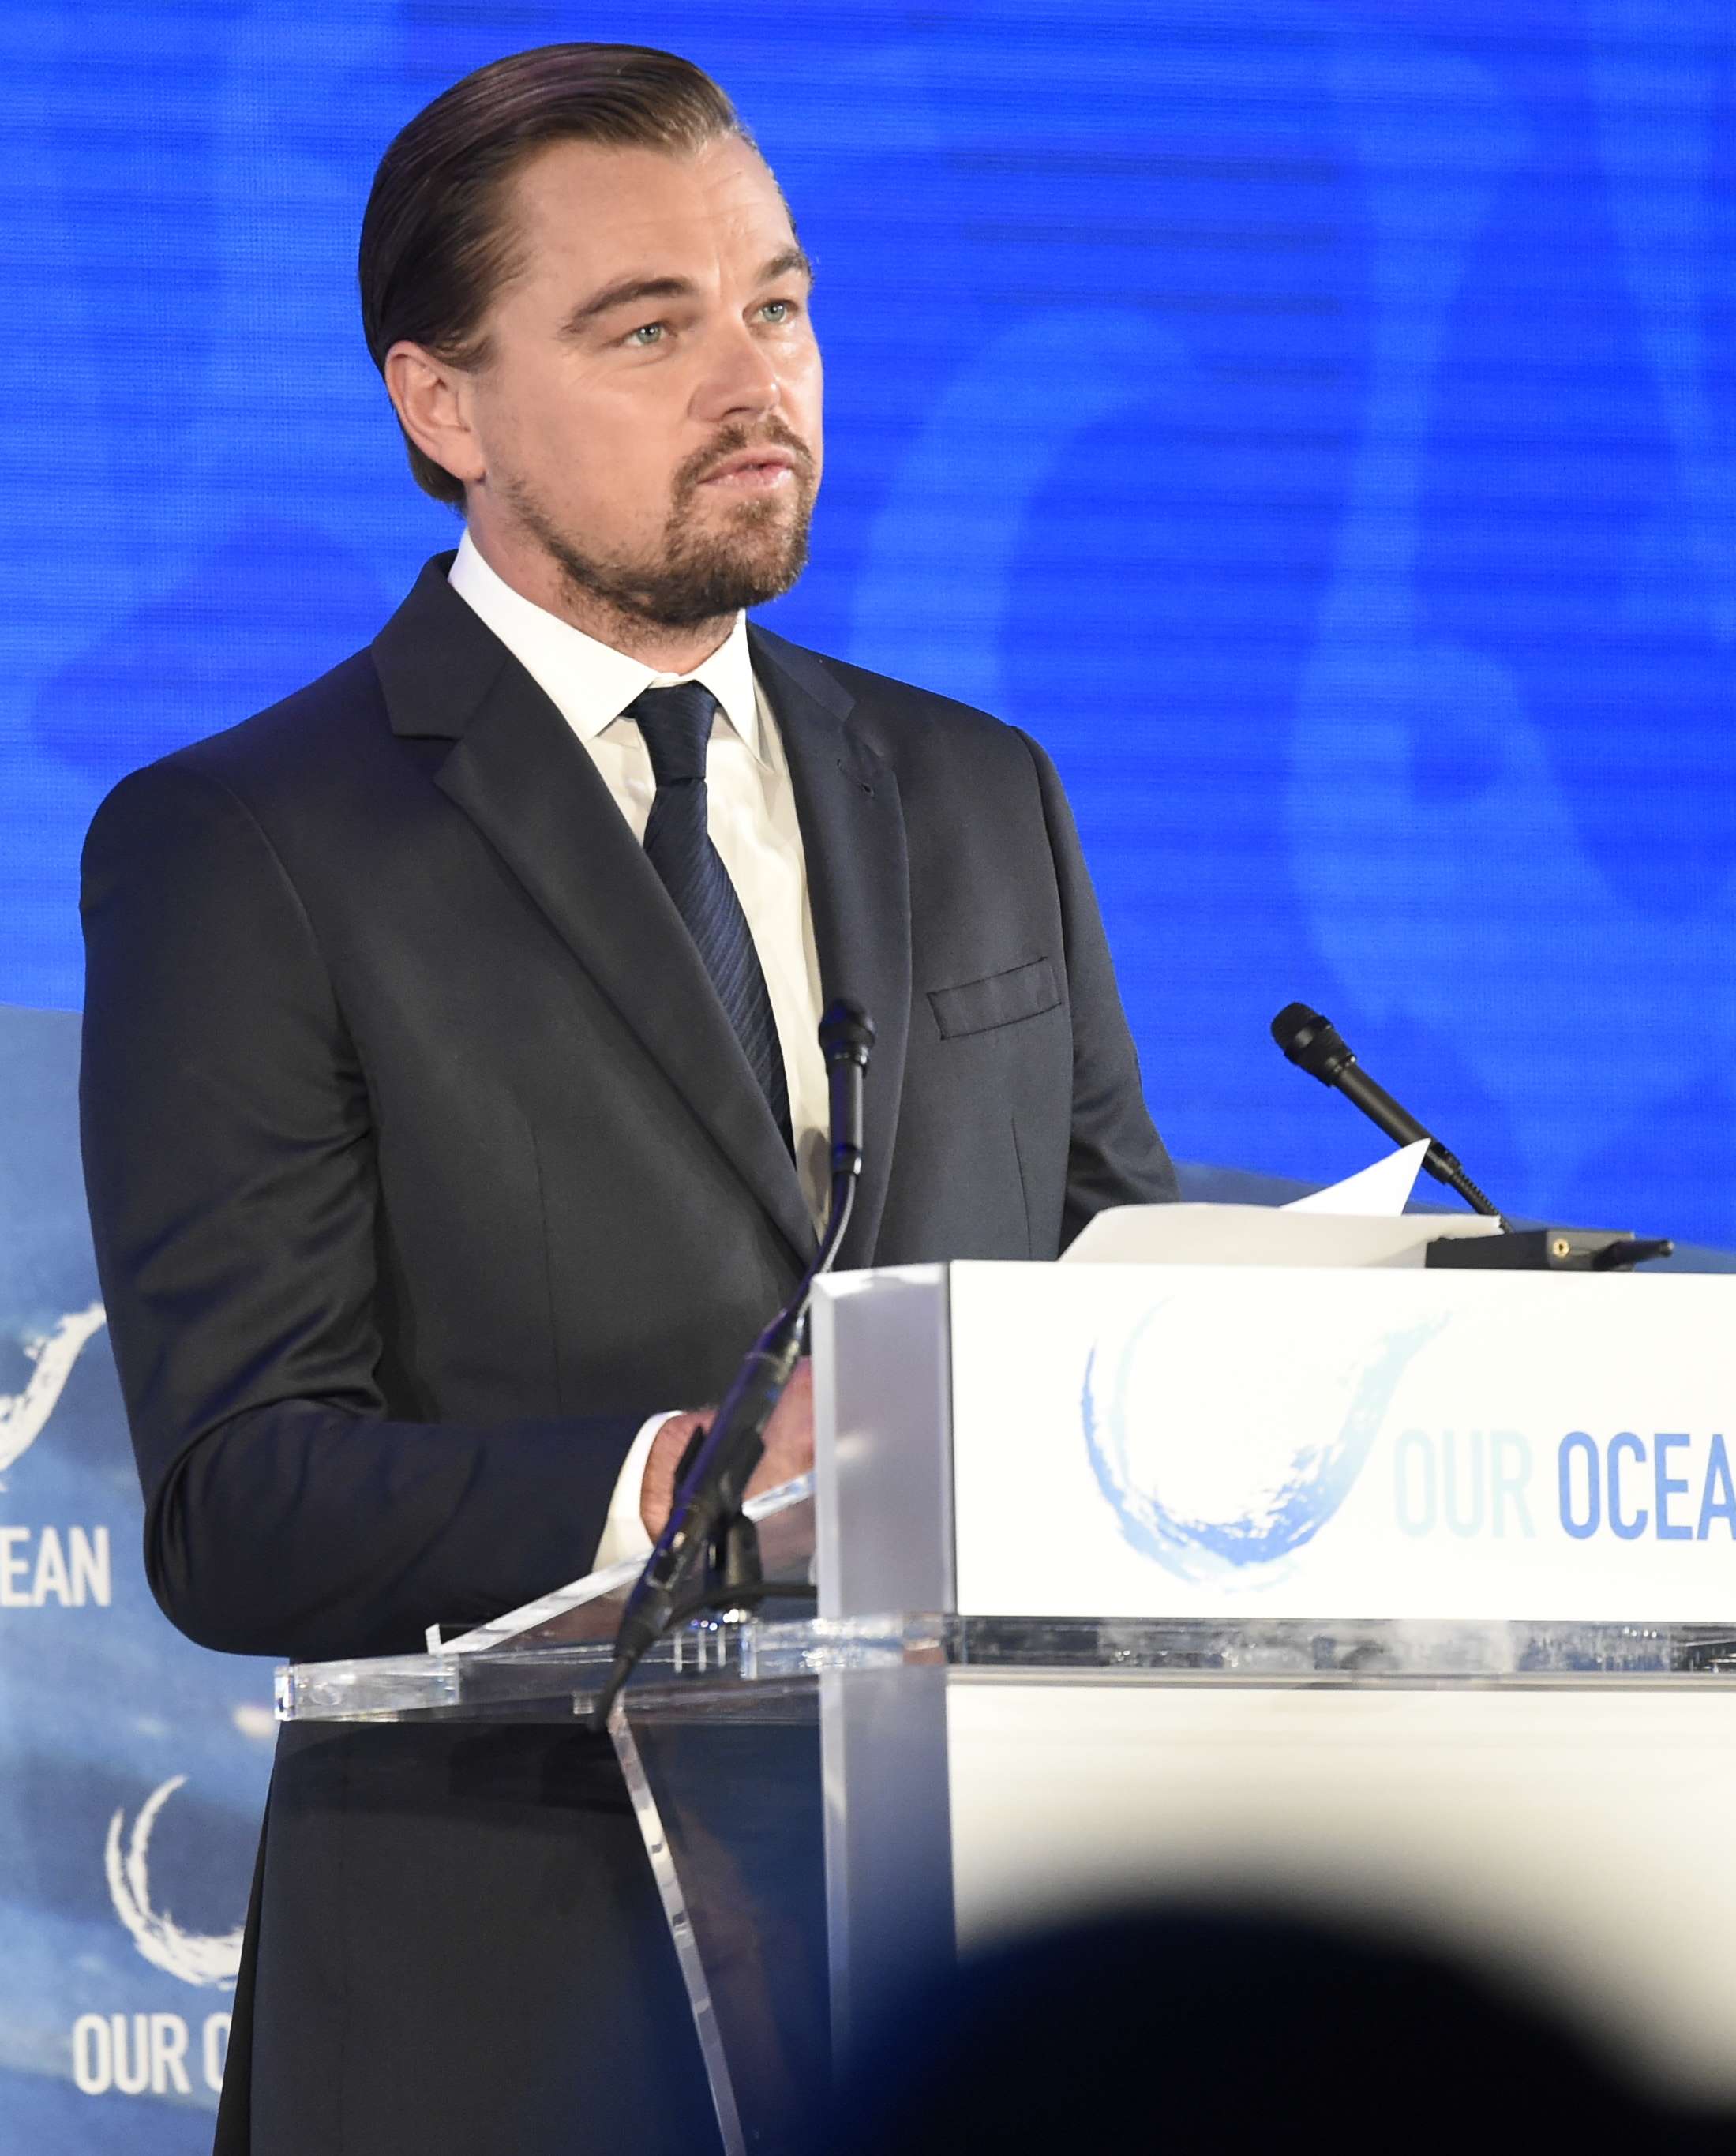 A white man with brown hair, combed back, and a trim mustache and beard wearing a dark jacket and tie stands before a lectern speaking in front of a blue background